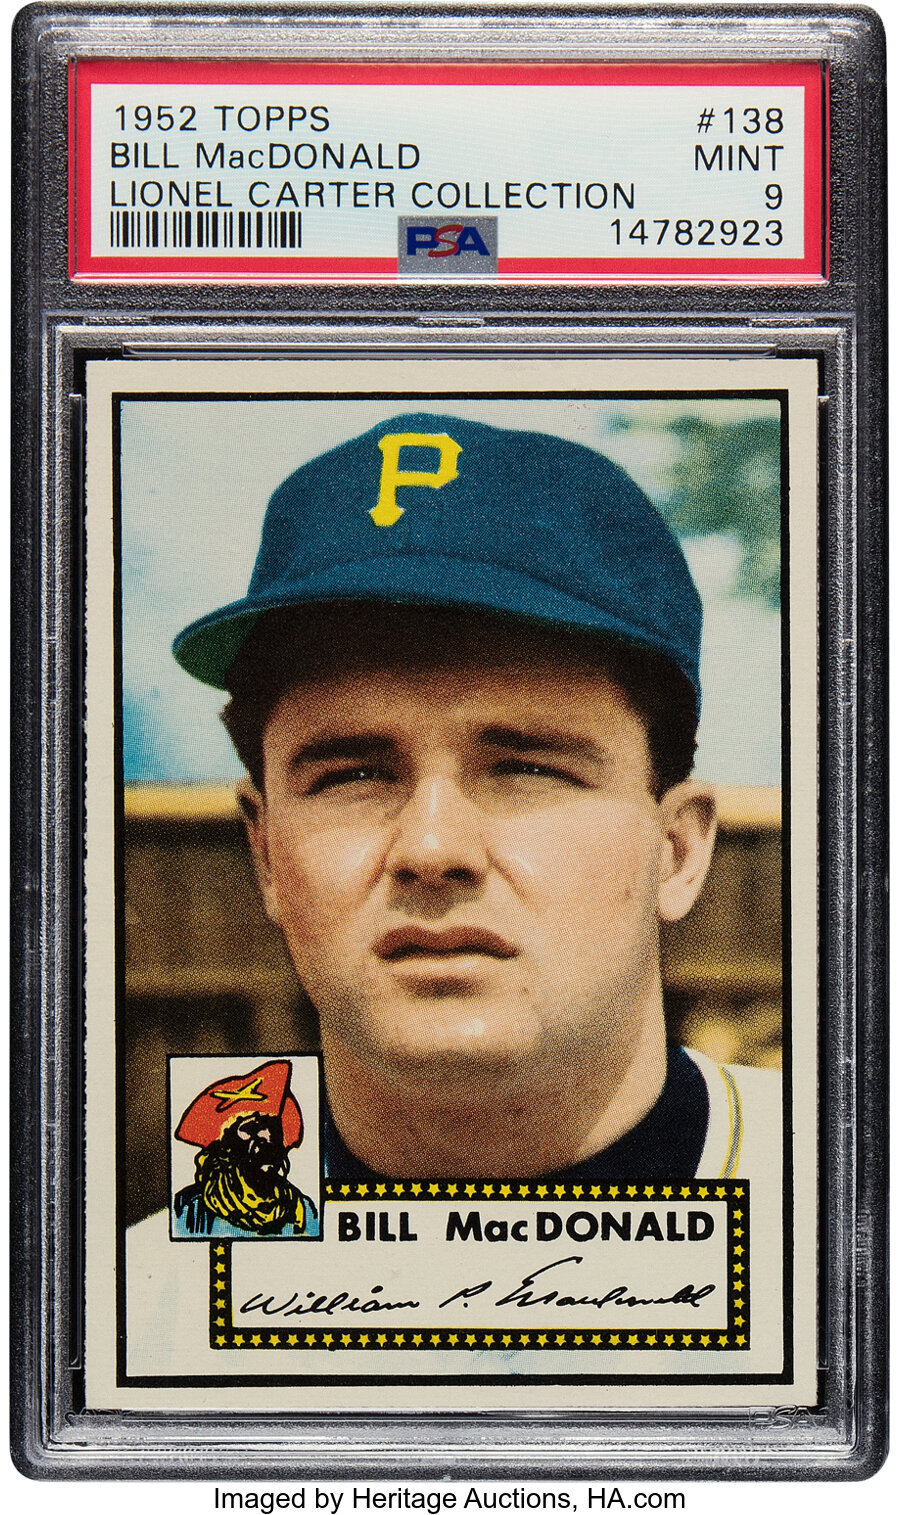 1952 Topps Bill MacDonald #138 PSA Mint 9 - Pop Four, None Superior! From the Lionel Carter Collection